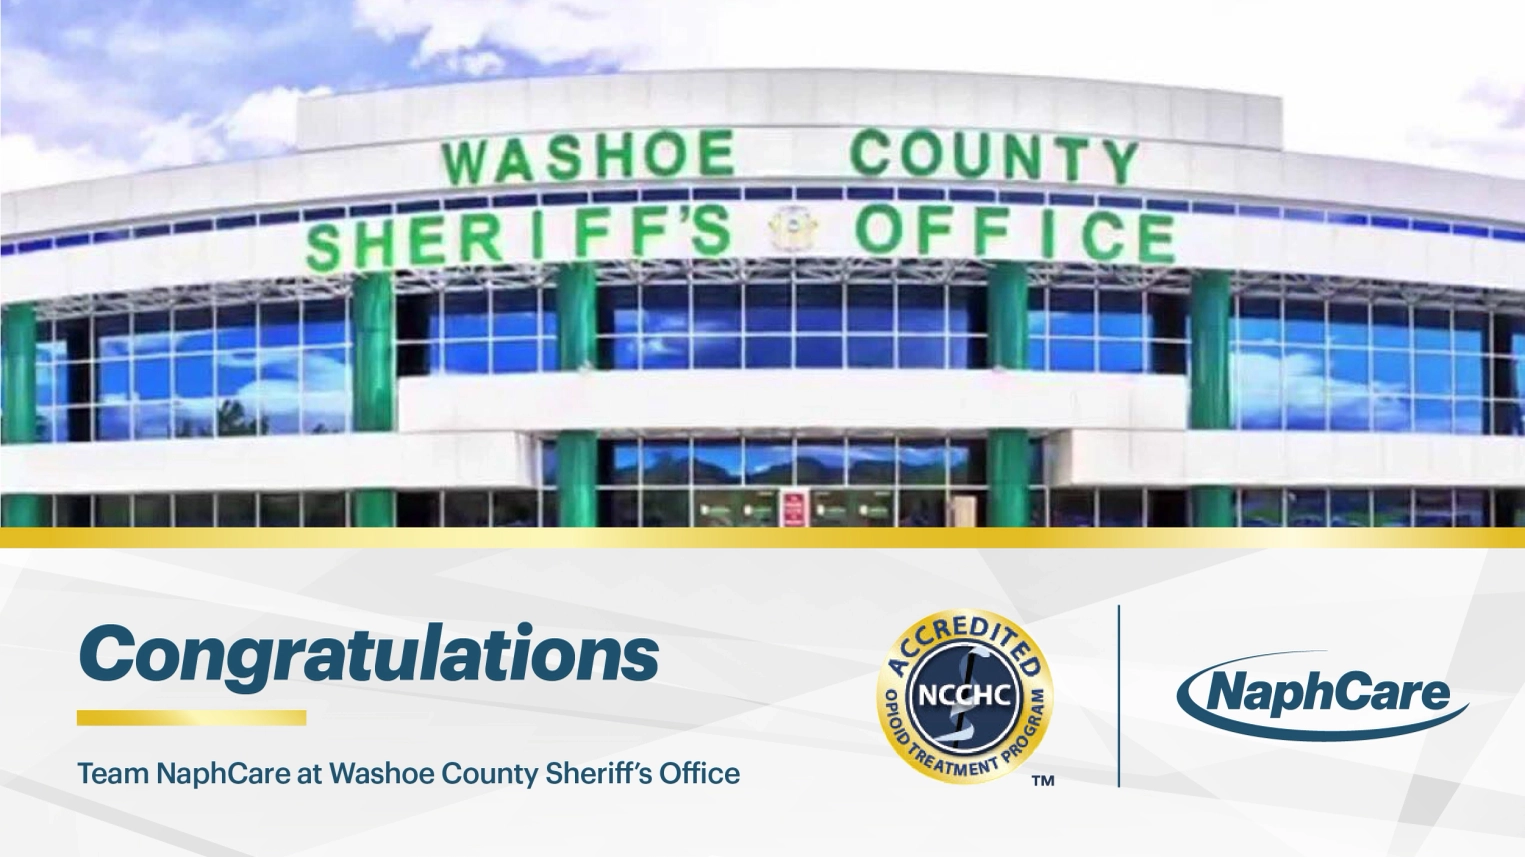 The Correctional Healthcare NaphCare Team Gets NCCHC Accreditation at Washoe County Sheriff's Office